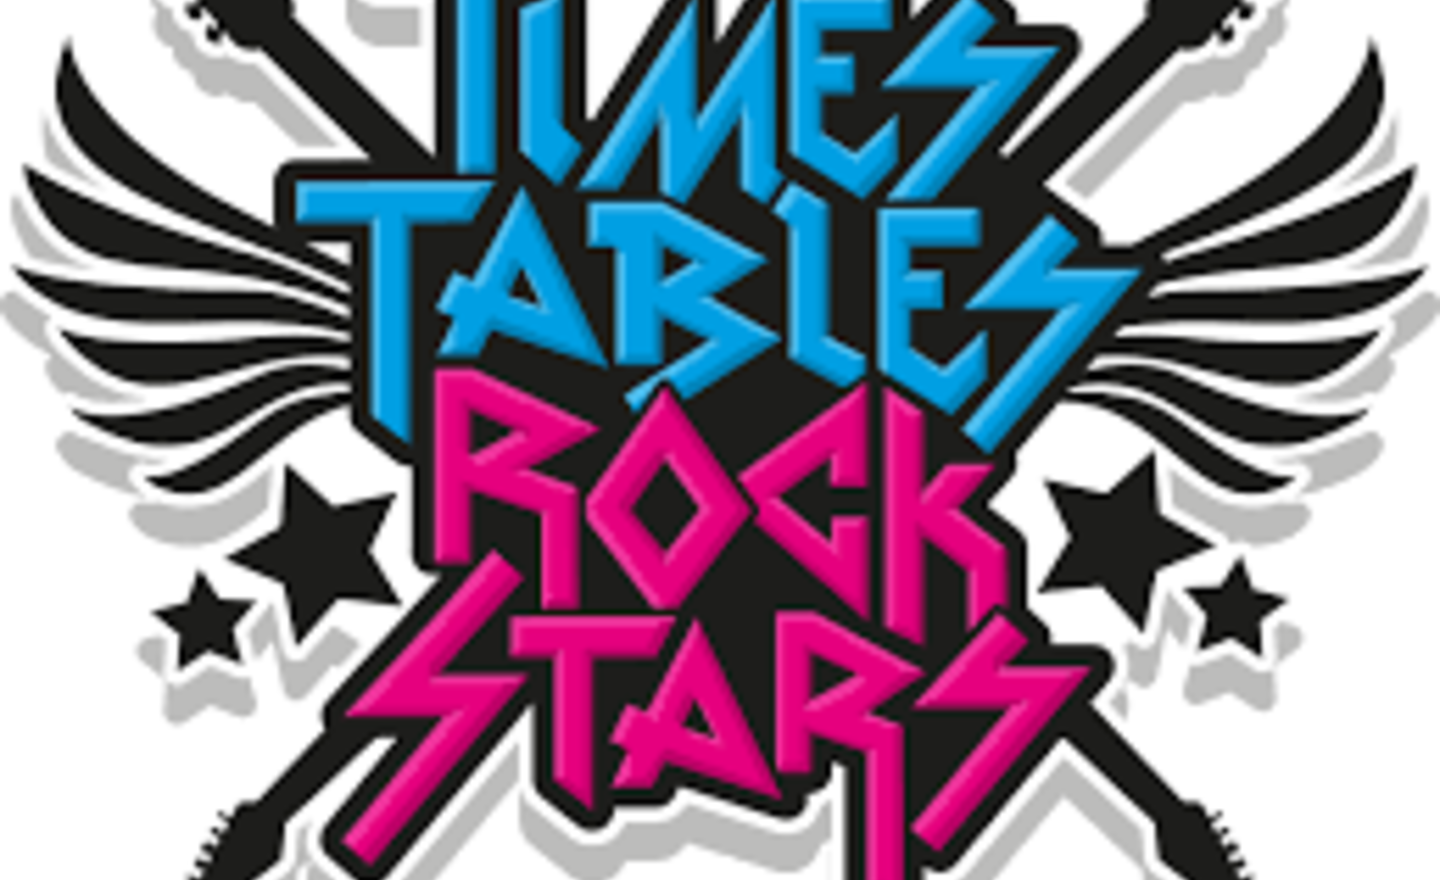 Image of Times Tables Rock Stars